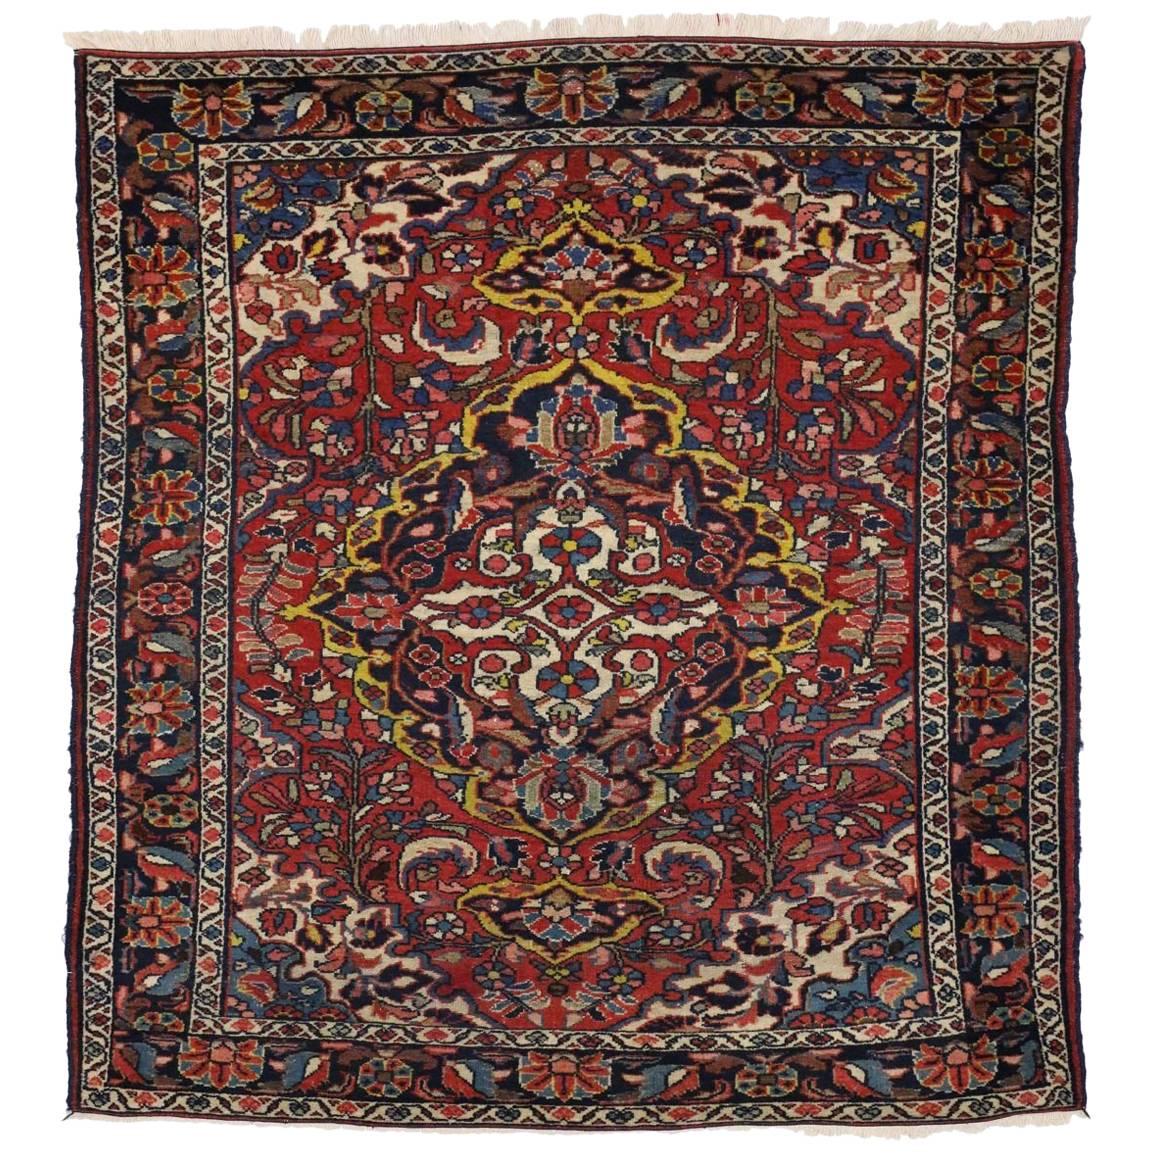 Antique Persian Lilihan Rug with Central Floral Bouquet Medallion 